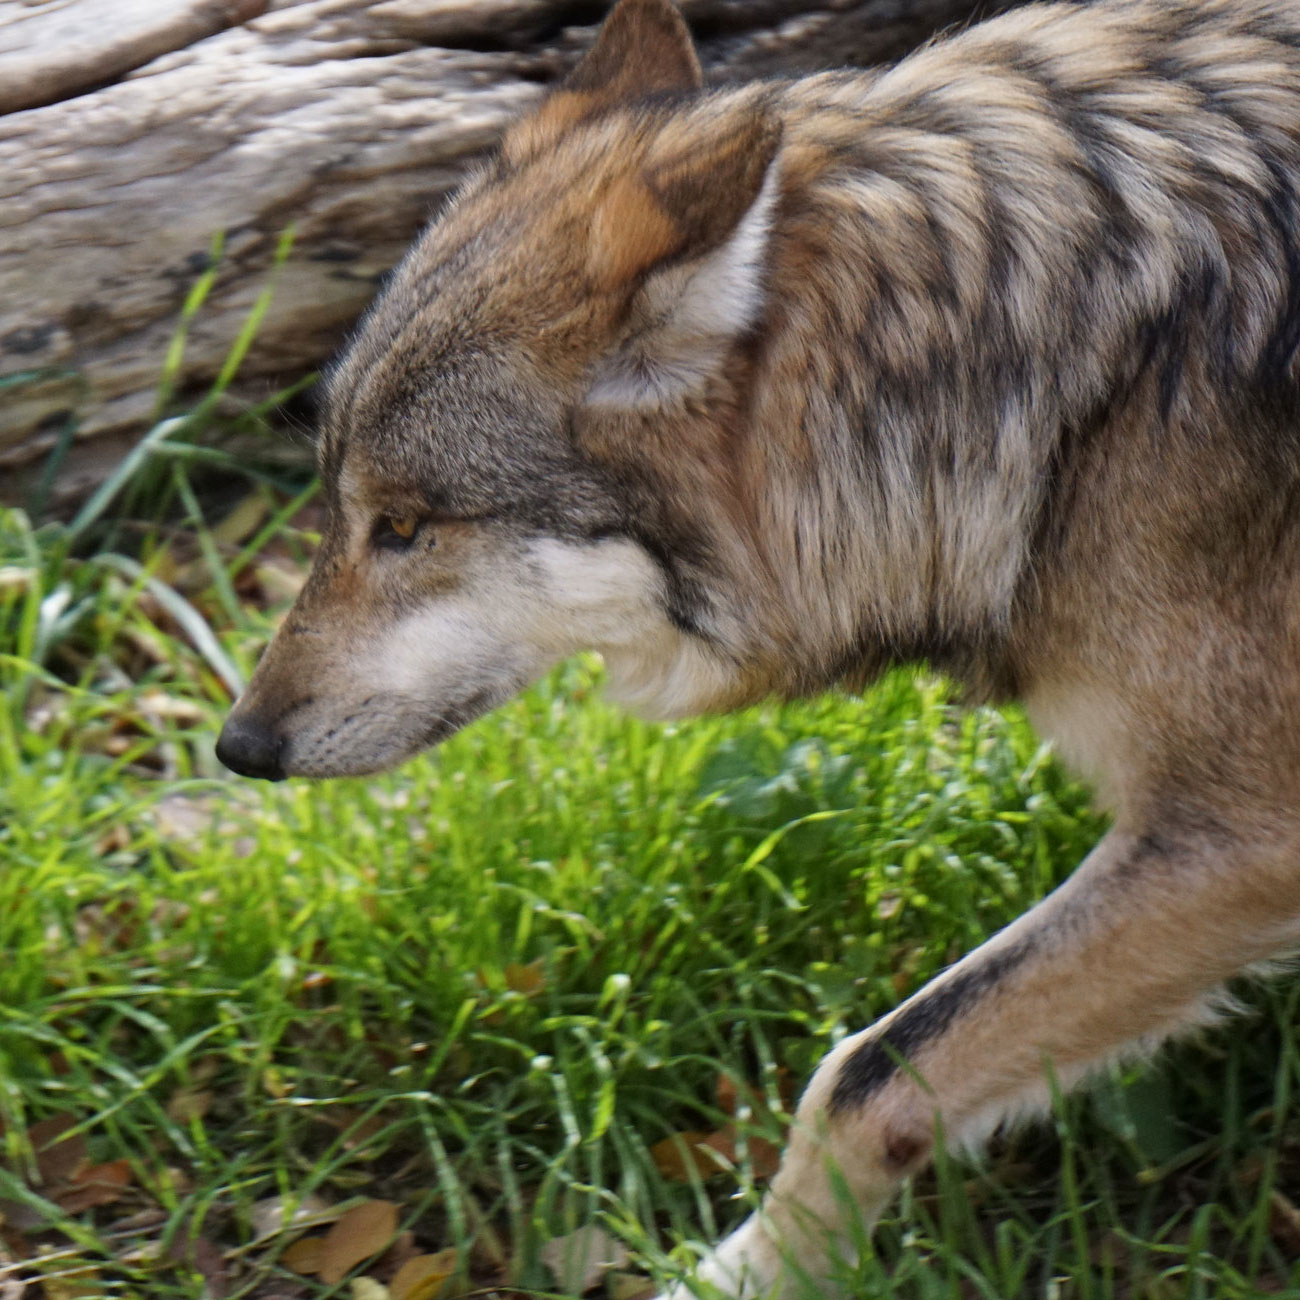 A Mexican wolf shown from the shoulder up, striding into the frame from the right. The wolf is buff, beige, gray, and black in color. It has its ears turned back.